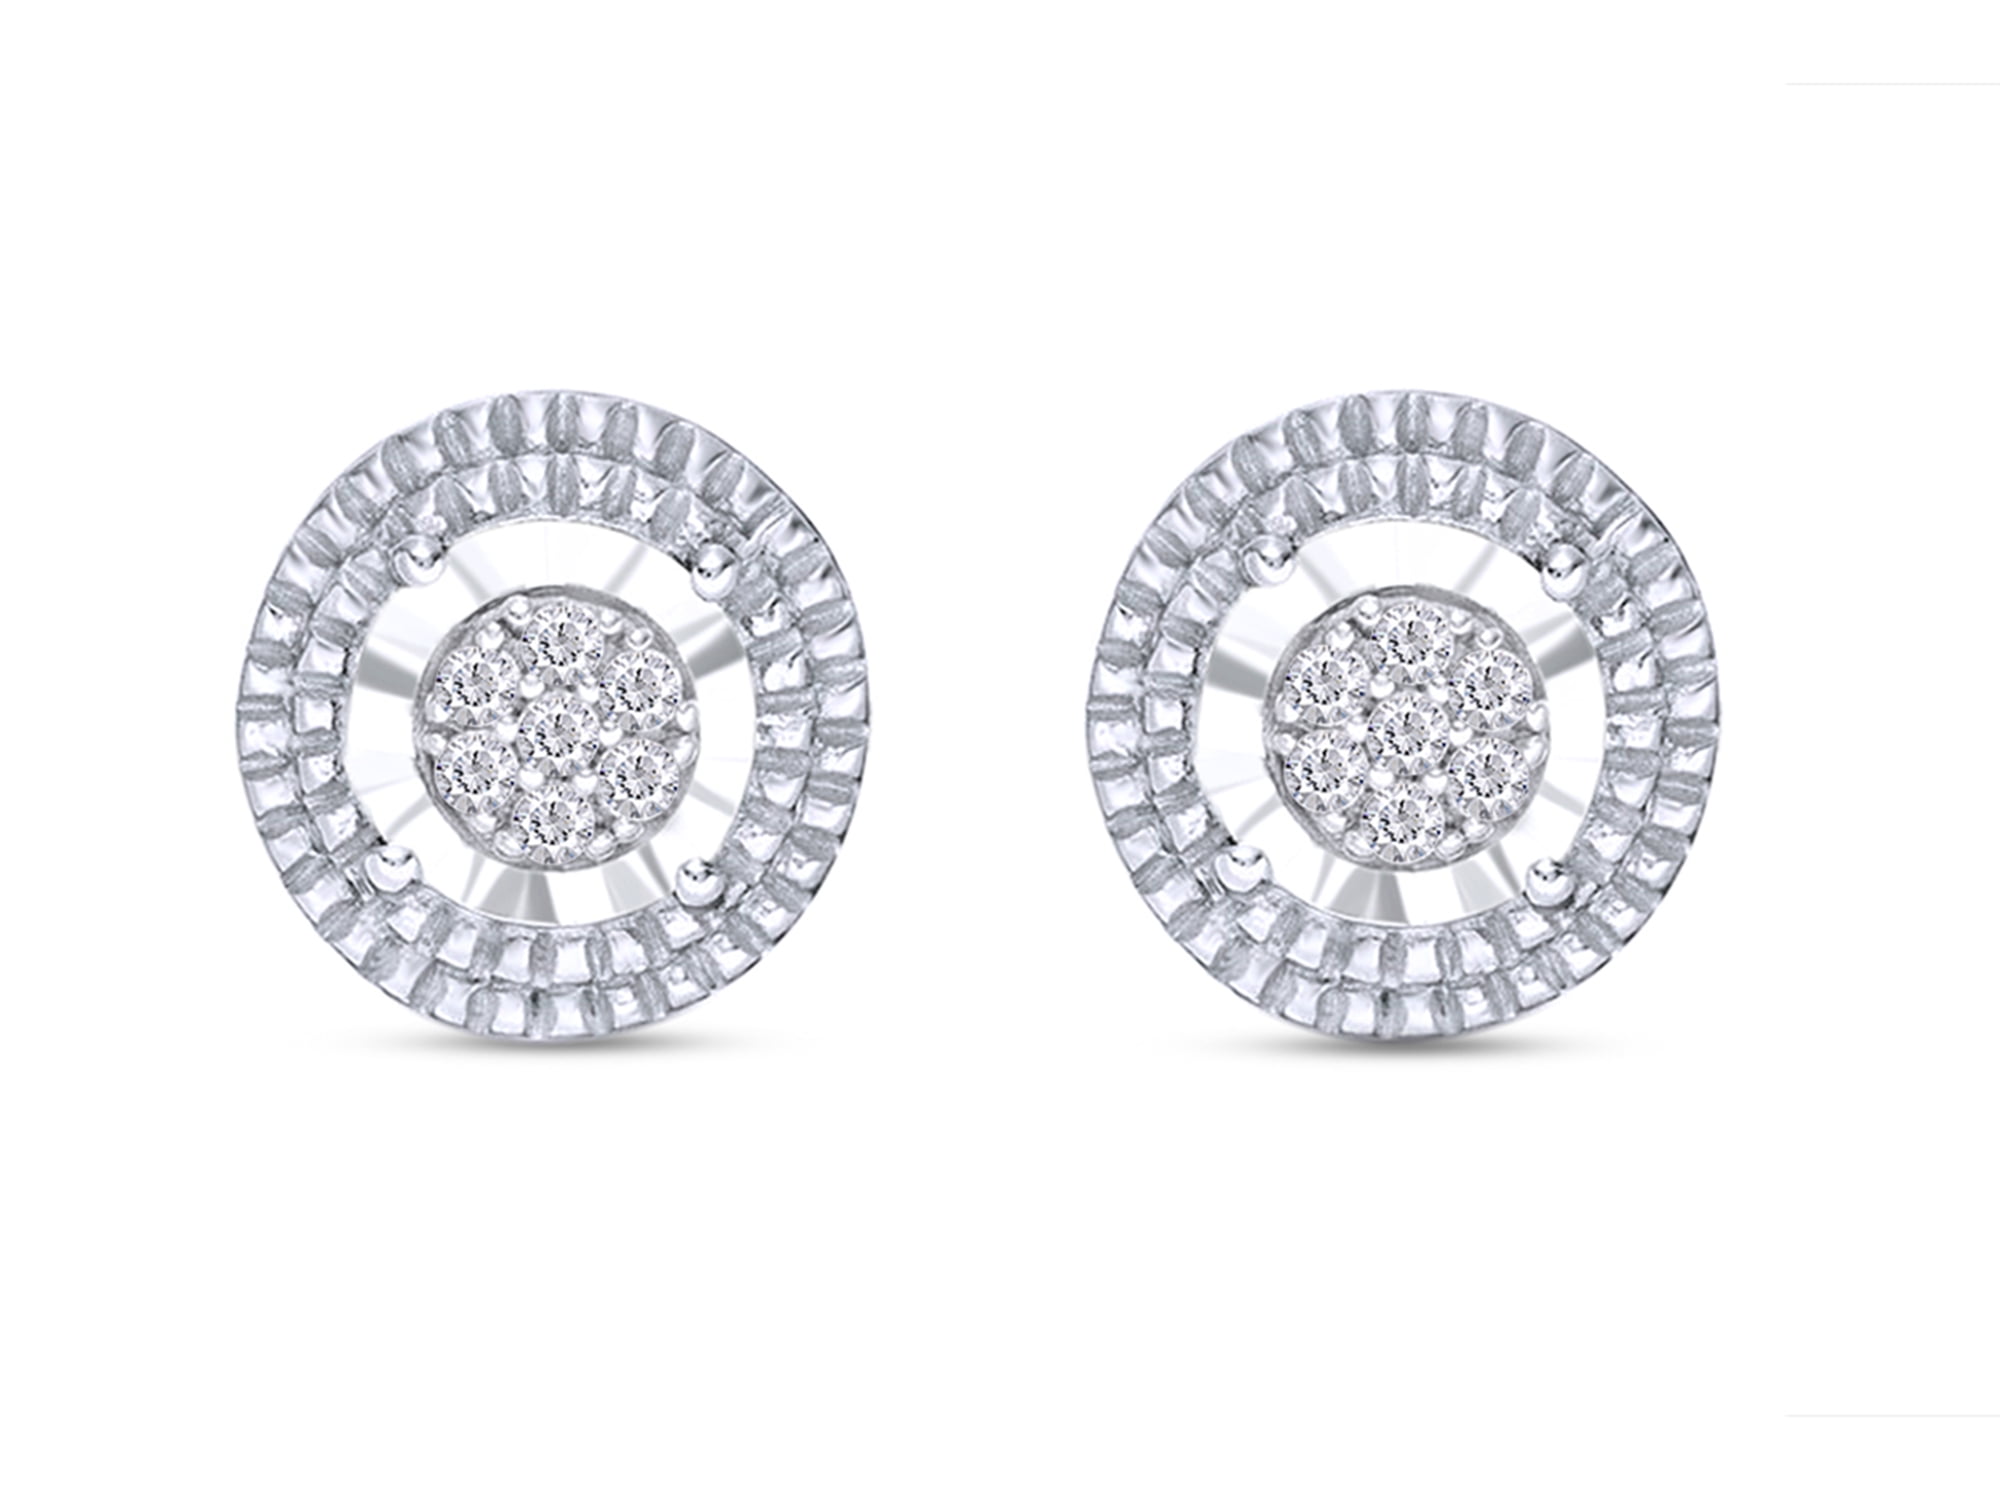 White Natural Diamond Stud Earrings In 14K White Gold Over Sterling Silver 0.05 Ct 